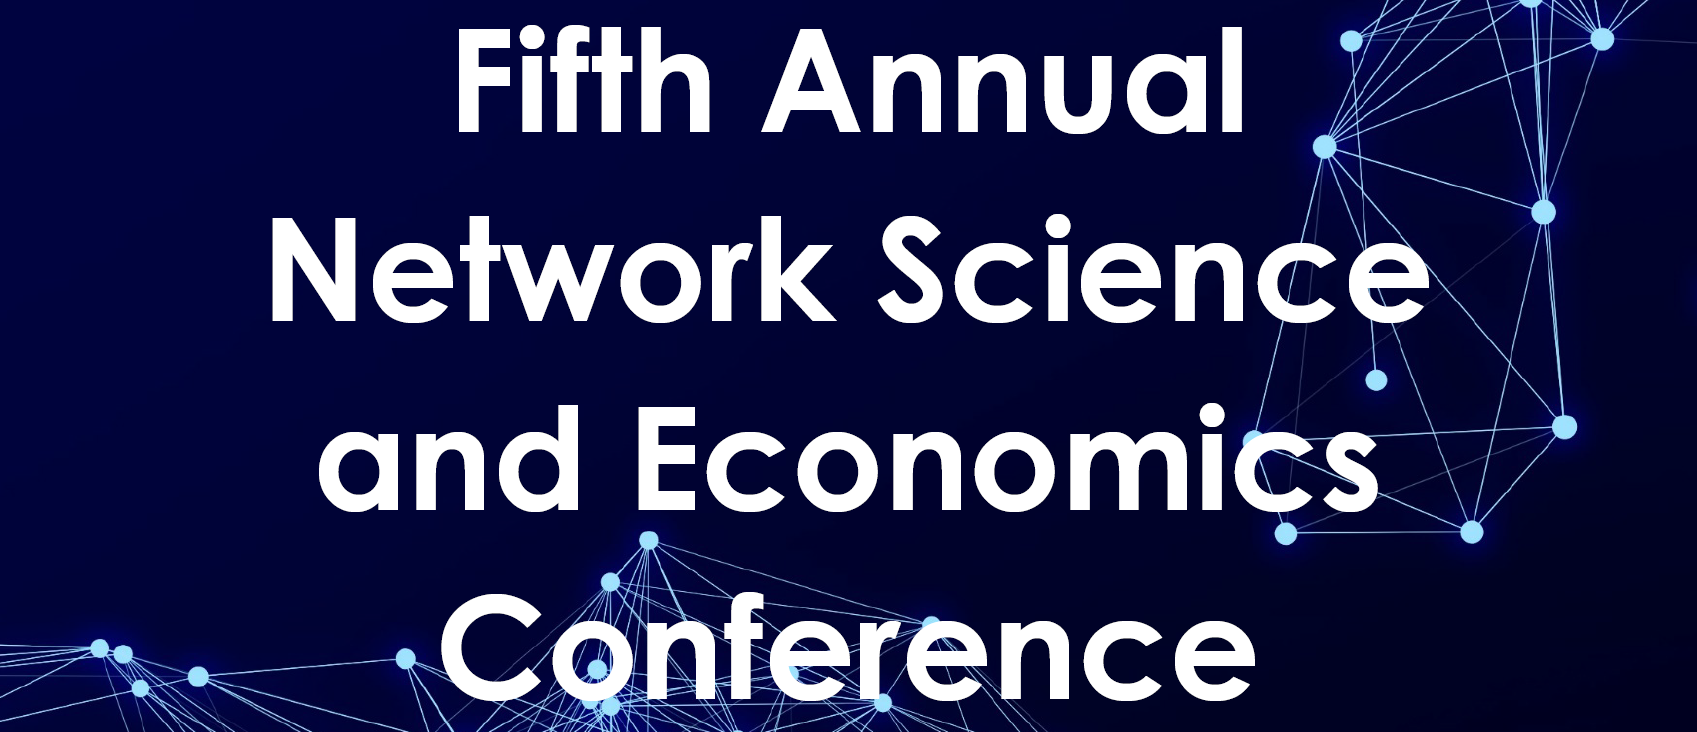 Fifth Annual Network Science and Economics Conference